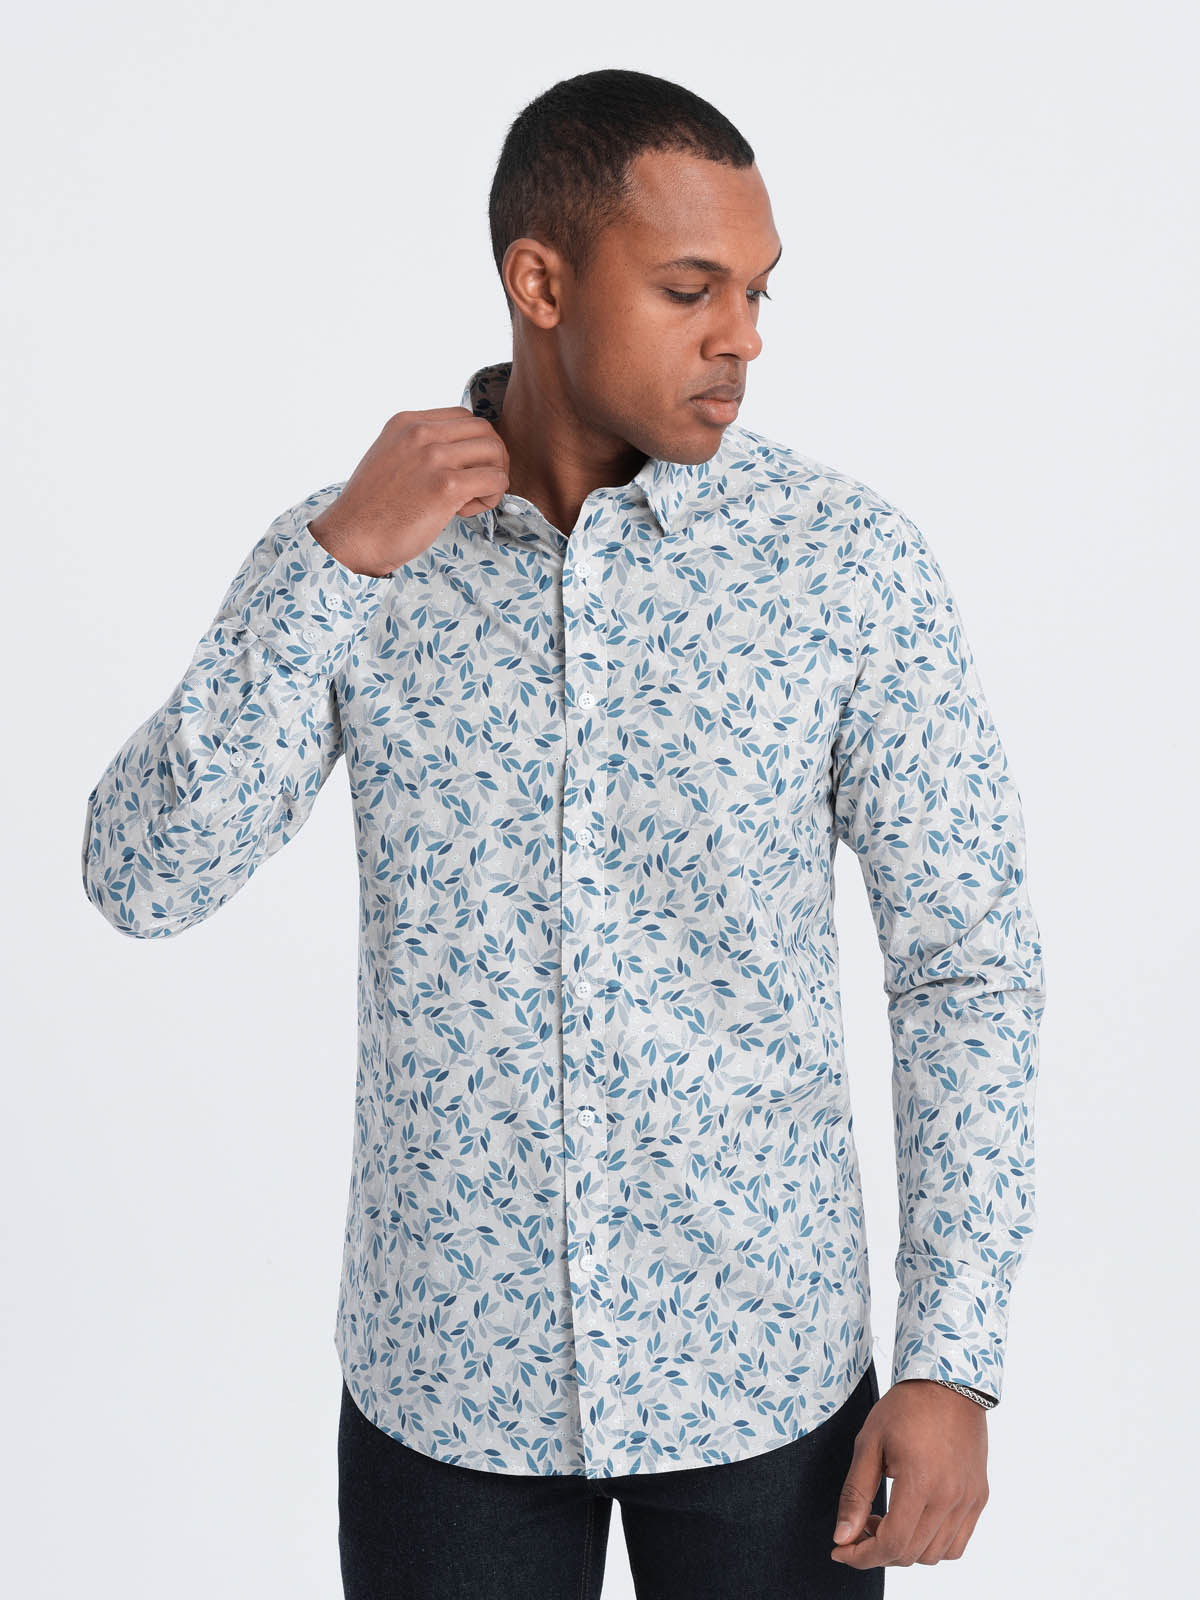 Ombre Men's SLIM FIT shirt in twig print - blue-gray